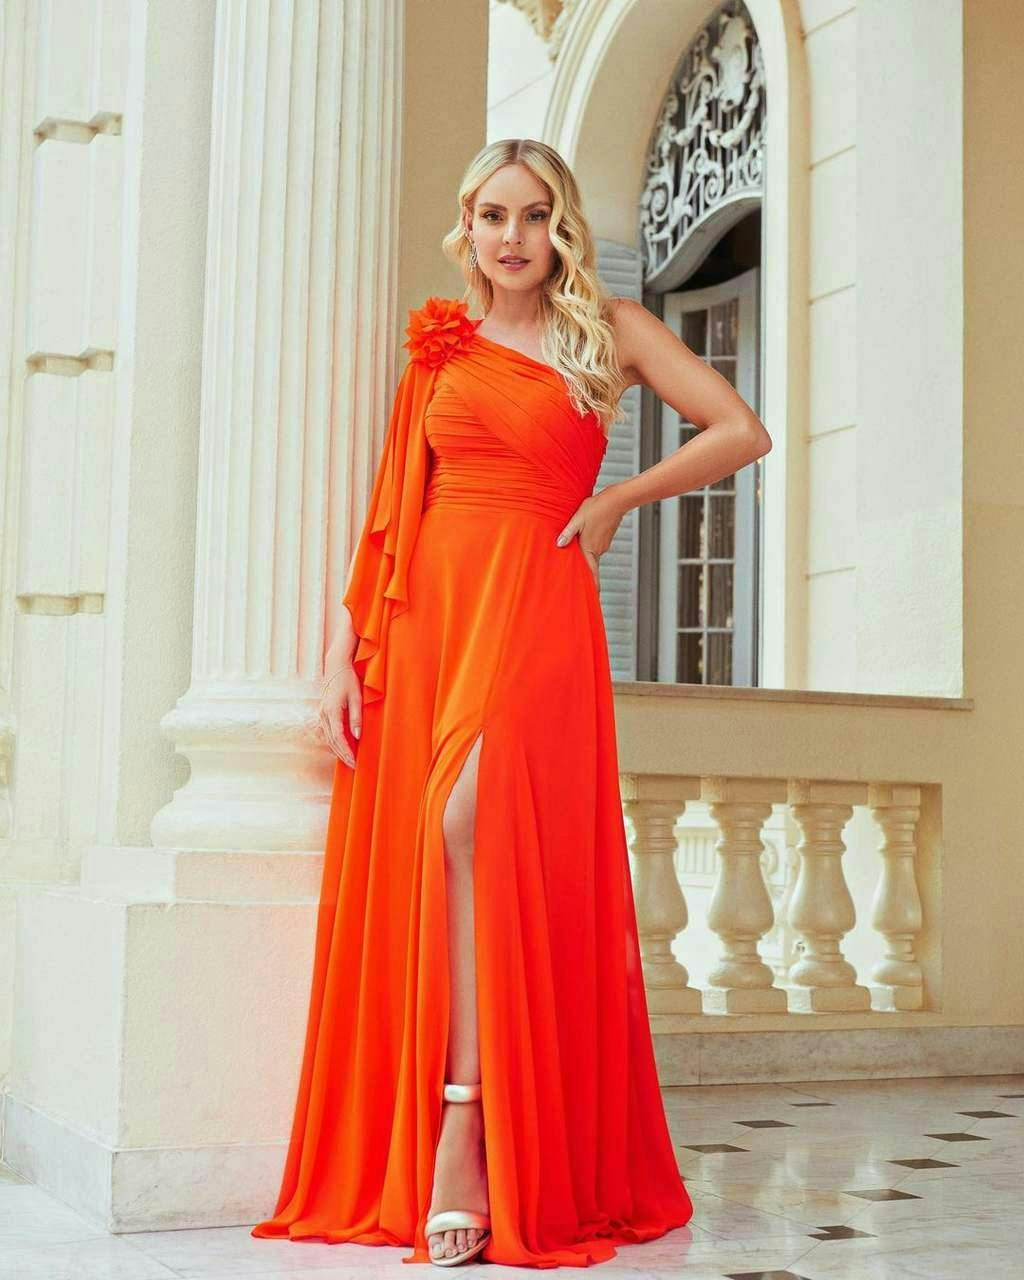 dress clothing evening dress formal wear person woman adult female gown fashion